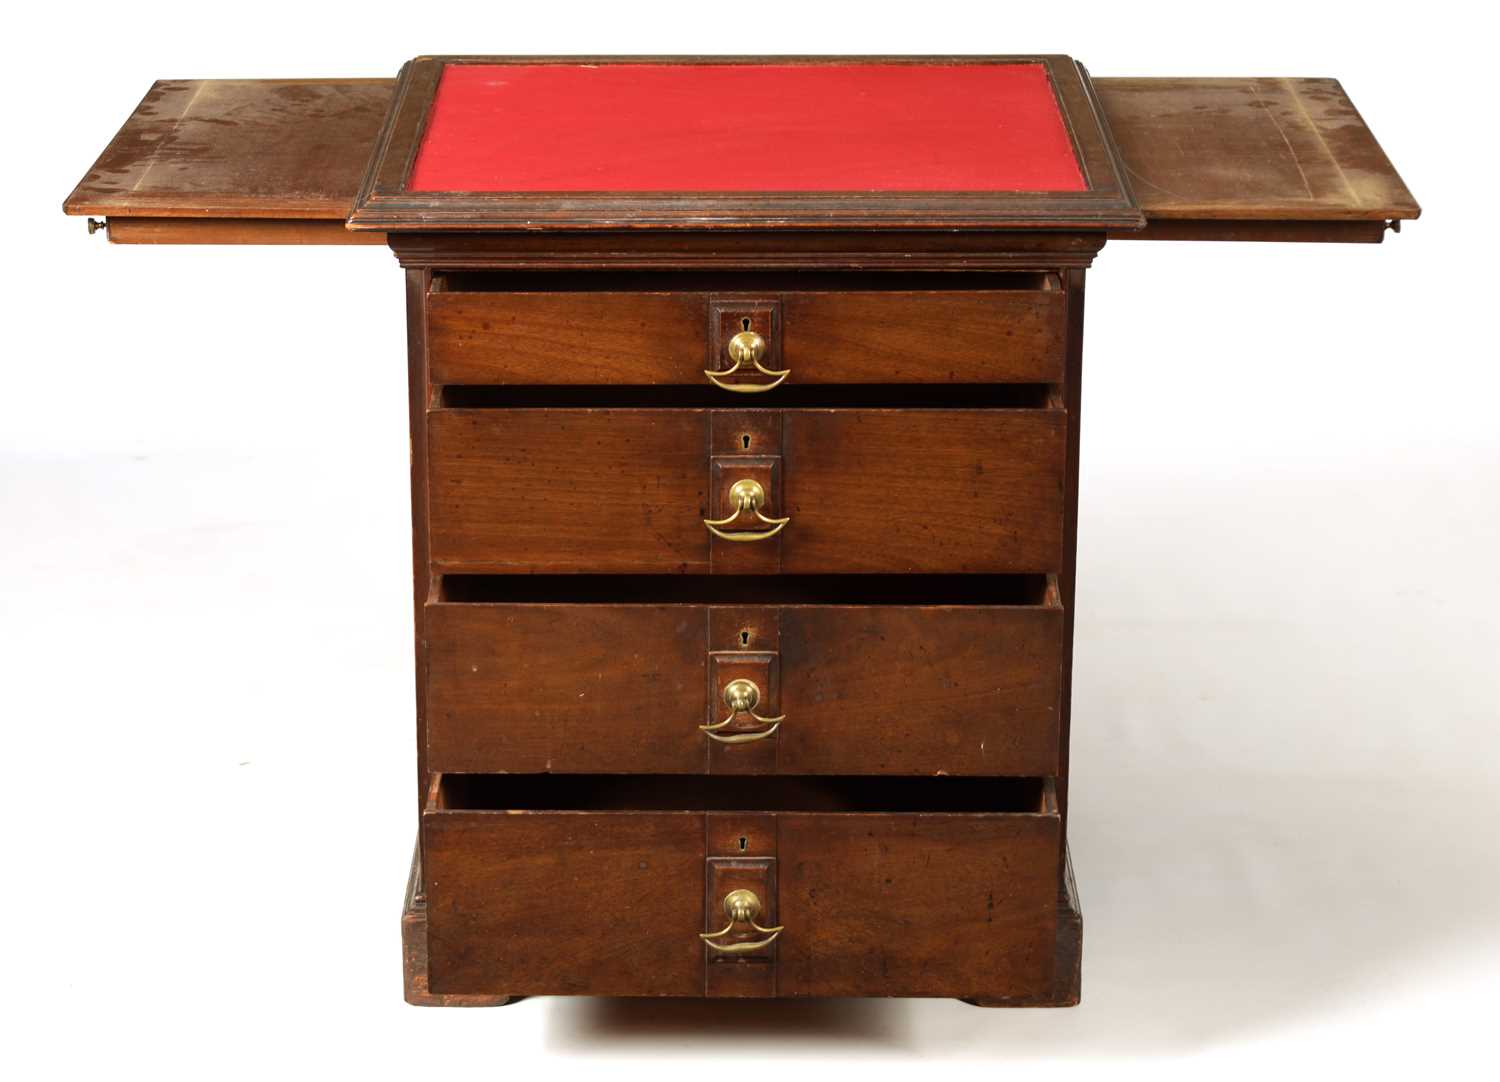 AN UNUSUAL LATE 19TH CENTURY WALNUT SMALL CHEST OF DRAWERS BY E. WALKER CABINETMAKER AND DATED 1893 - Image 2 of 7